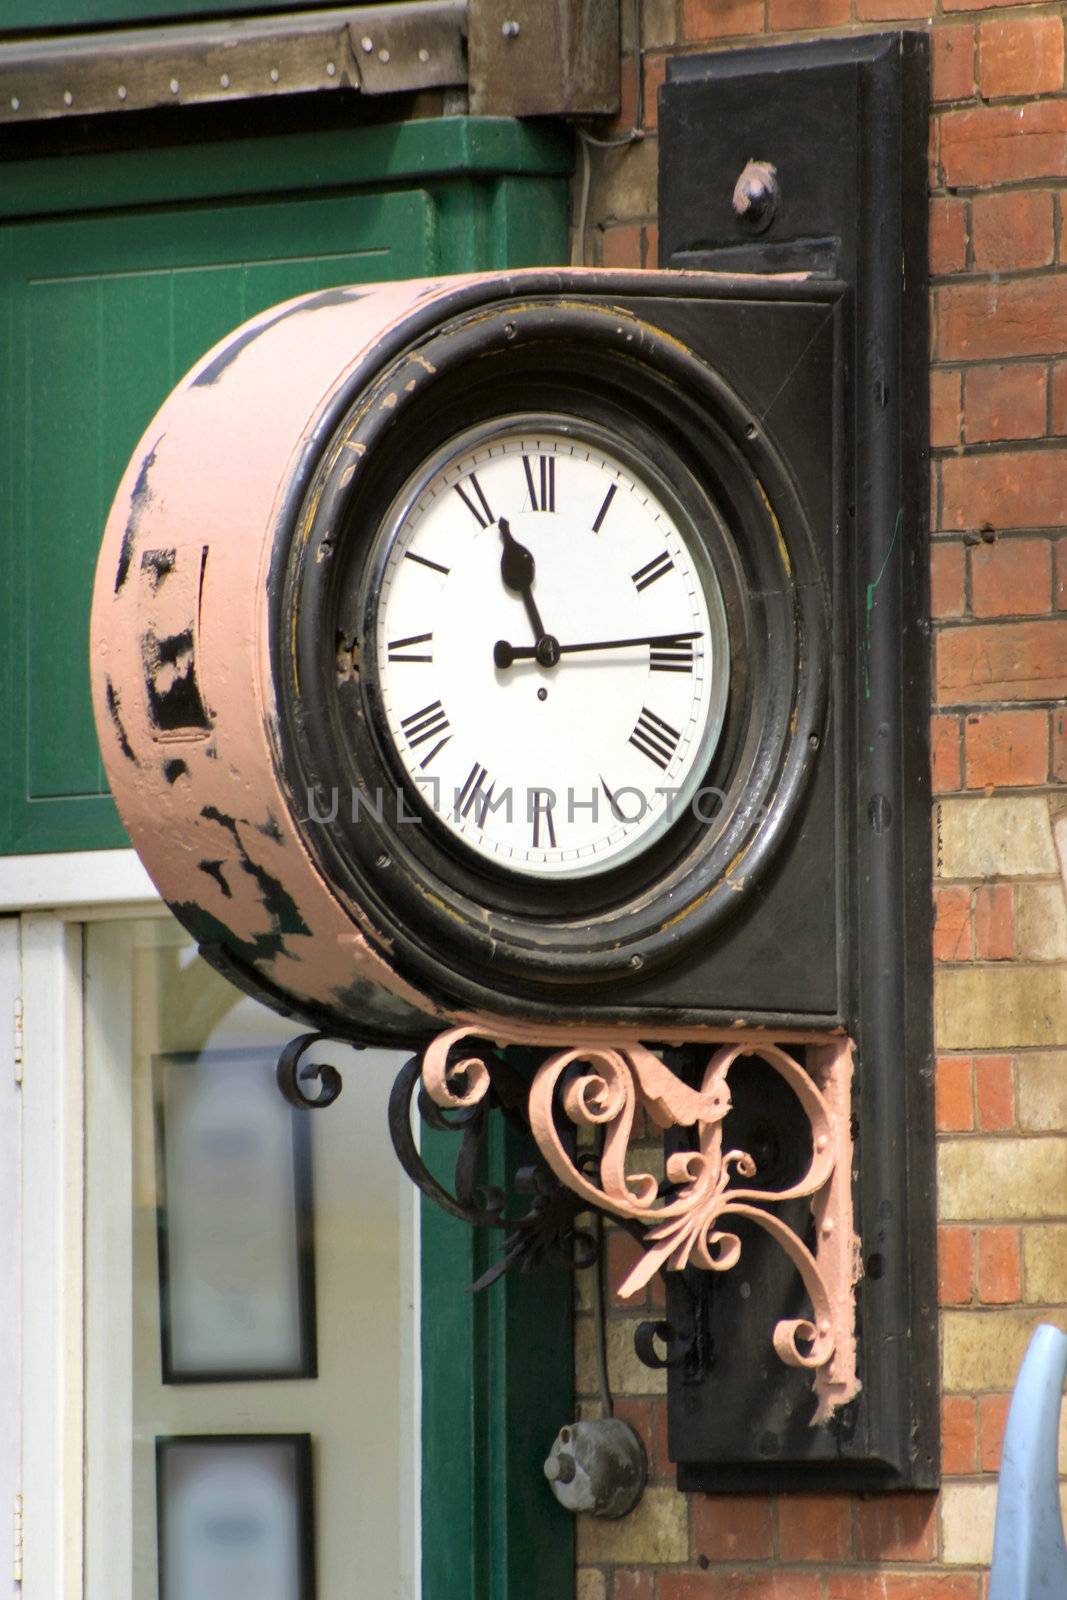 old clock in use at a railway station